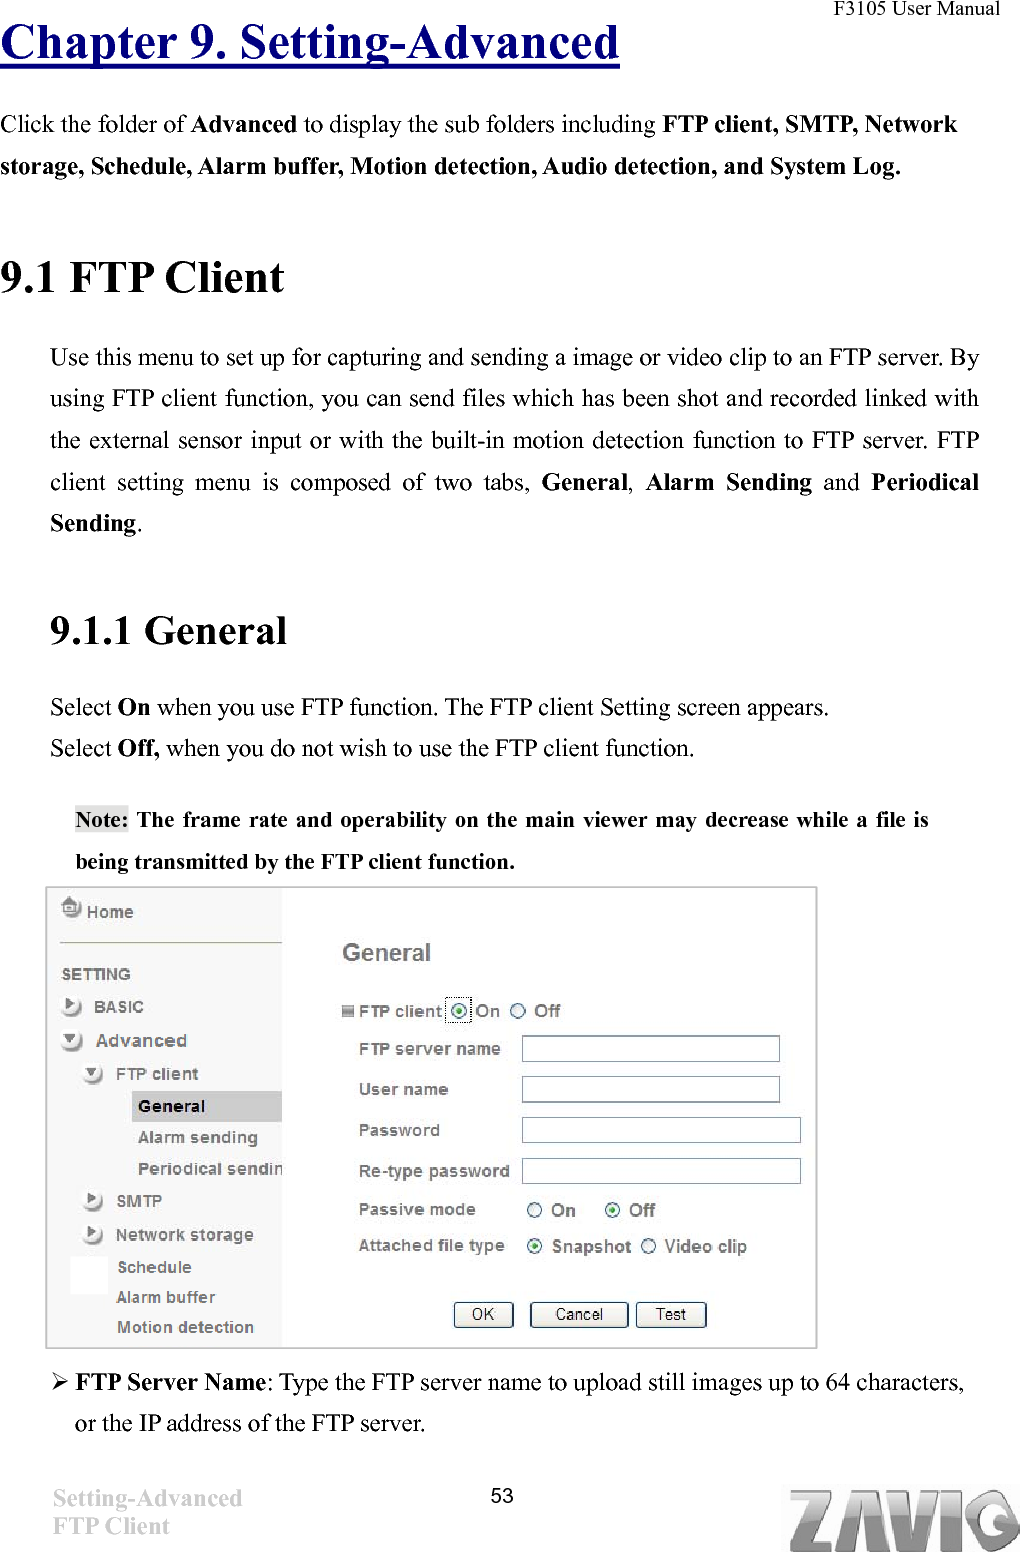 F3105 User Manual   Chapter 9. Setting-Advanced Click the folder of Advanced to display the sub folders including FTP client, SMTP, Network storage, Schedule, Alarm buffer, Motion detection, Audio detection, and System Log.   9.1 FTP Client Use this menu to set up for capturing and sending a image or video clip to an FTP server. By using FTP client function, you can send files which has been shot and recorded linked with the external sensor input or with the built-in motion detection function to FTP server. FTP client setting menu is composed of two tabs, General,  Alarm Sending and  Periodical Sending.  9.1.1 General Select On when you use FTP function. The FTP client Setting screen appears.   Select Off, when you do not wish to use the FTP client function.  Note: The frame rate and operability on the main viewer may decrease while a file is being transmitted by the FTP client function.           FTP Server Name: Type the FTP server name to upload still images up to 64 characters, or the IP address of the FTP server. Setting-Advanced FTP Client  53